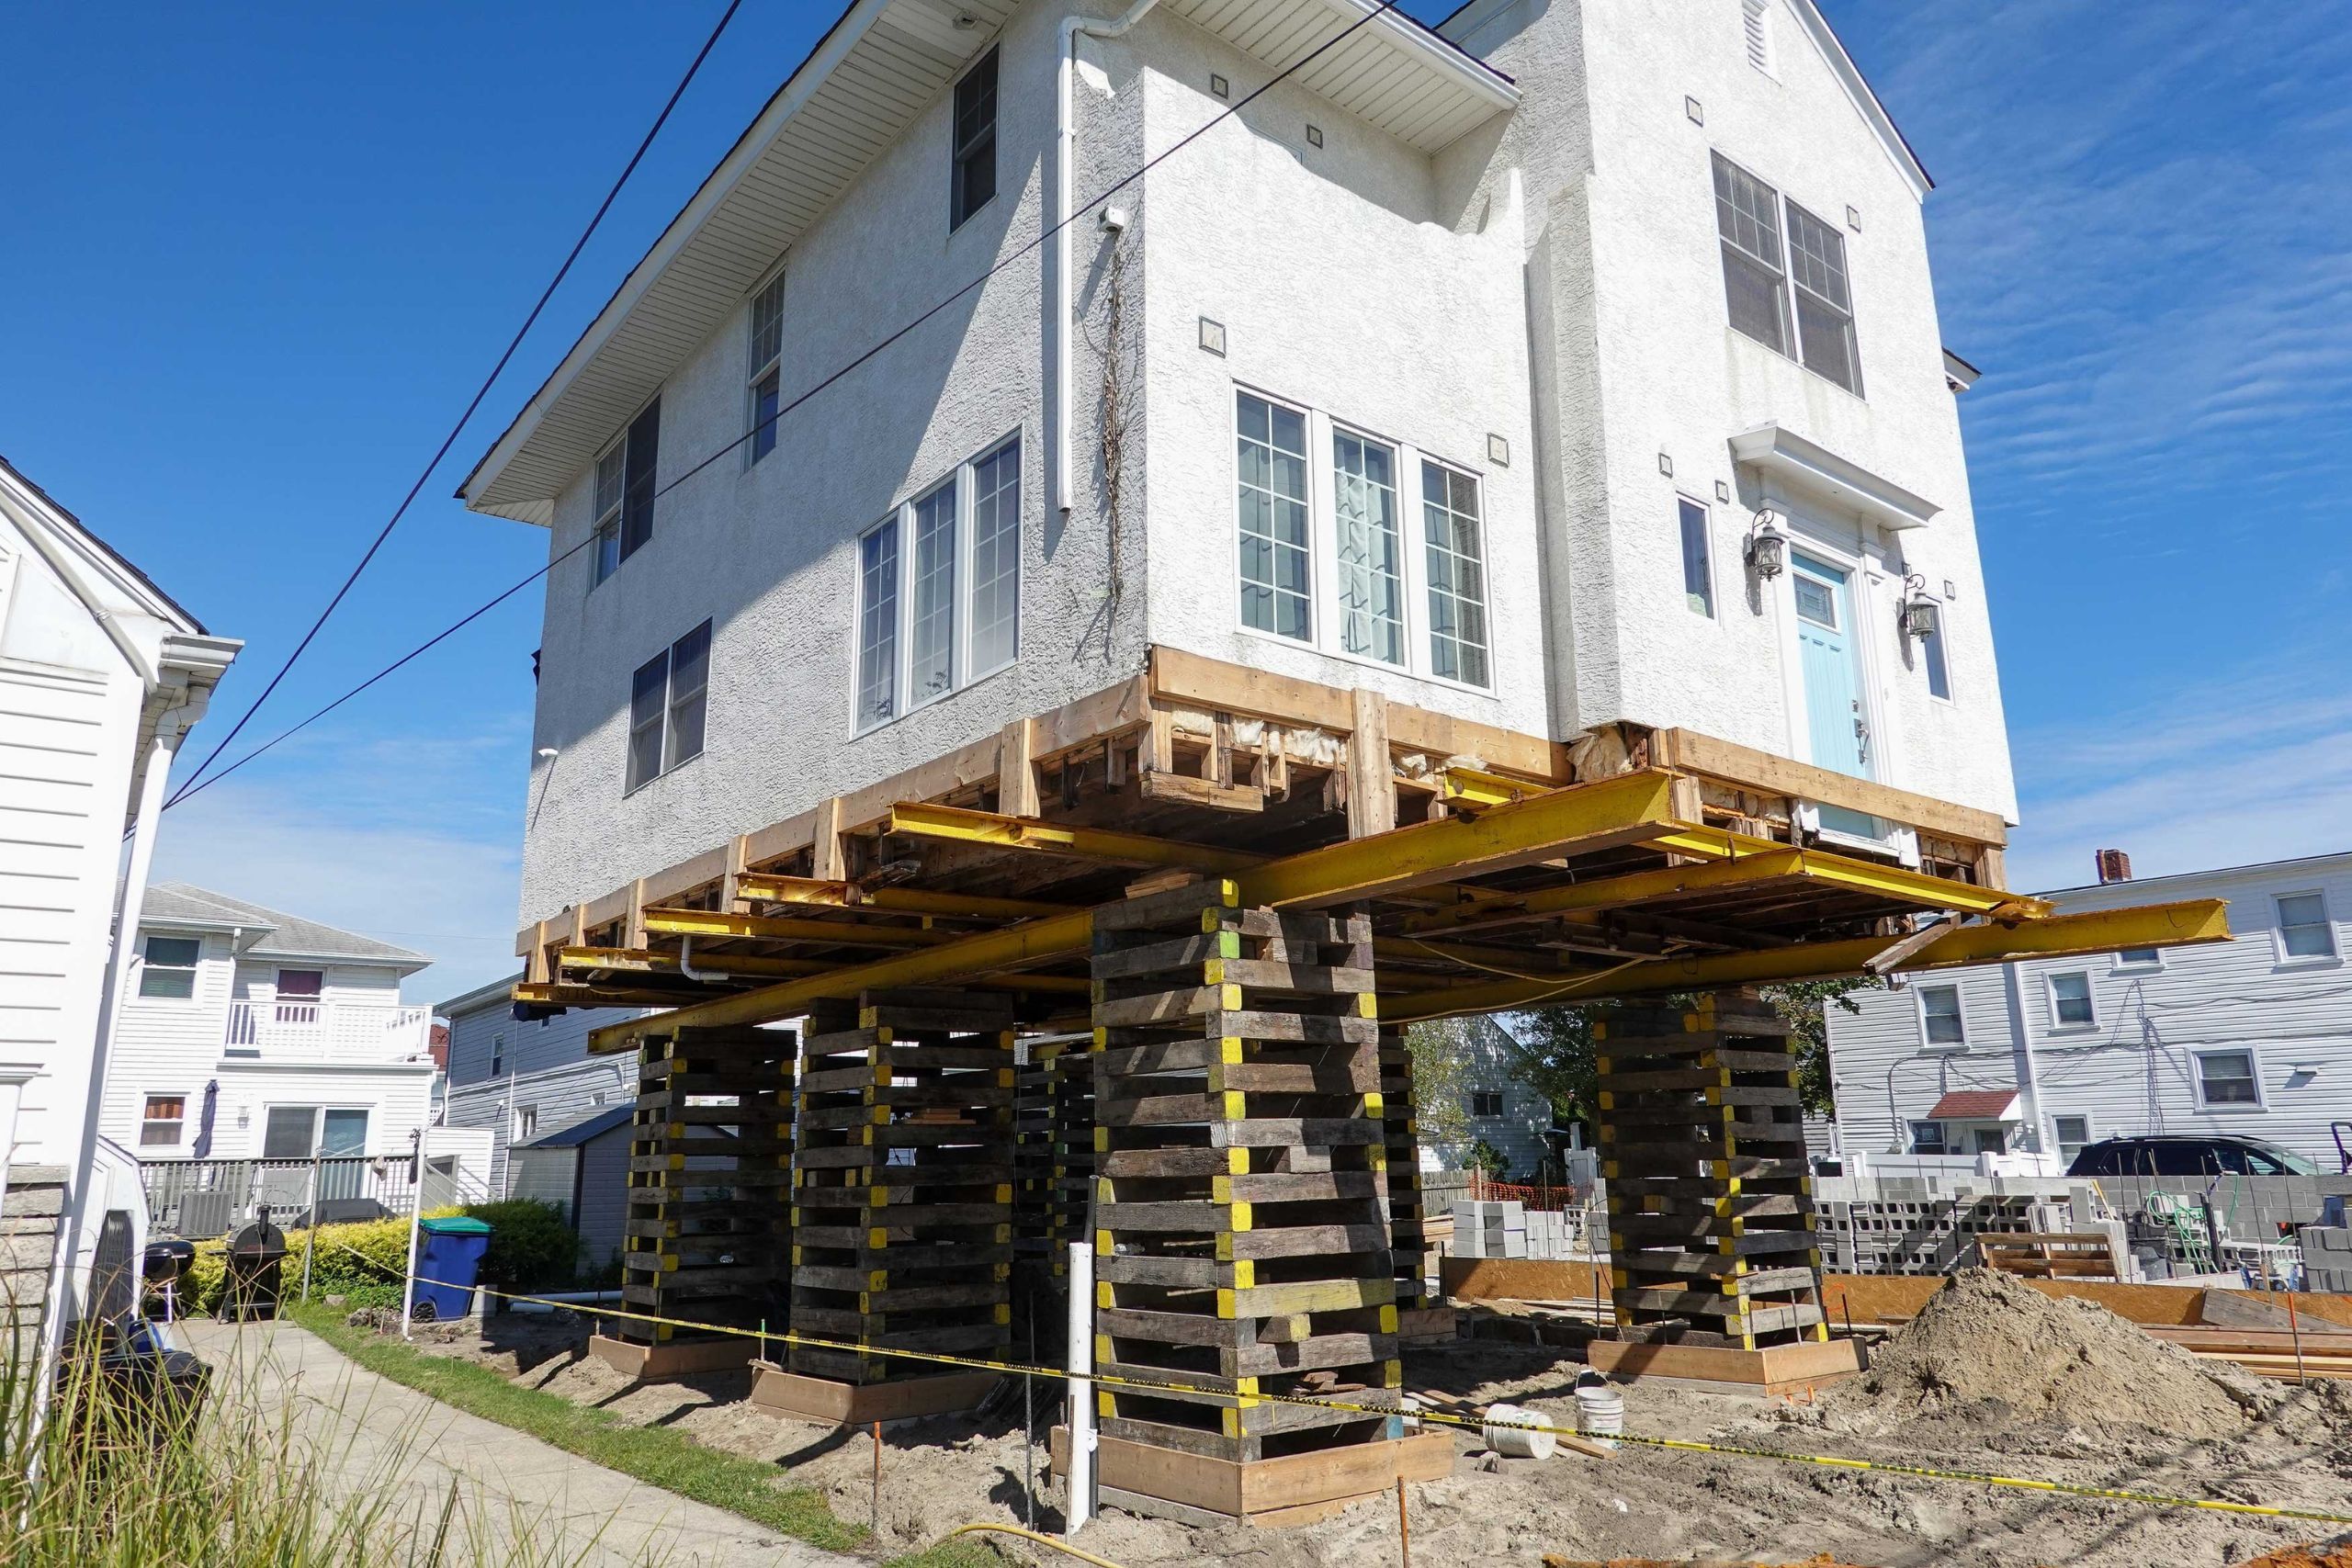 A team of professionals using specialized equipment to raise a house in Clearwater, preparing it for elevation and renovation